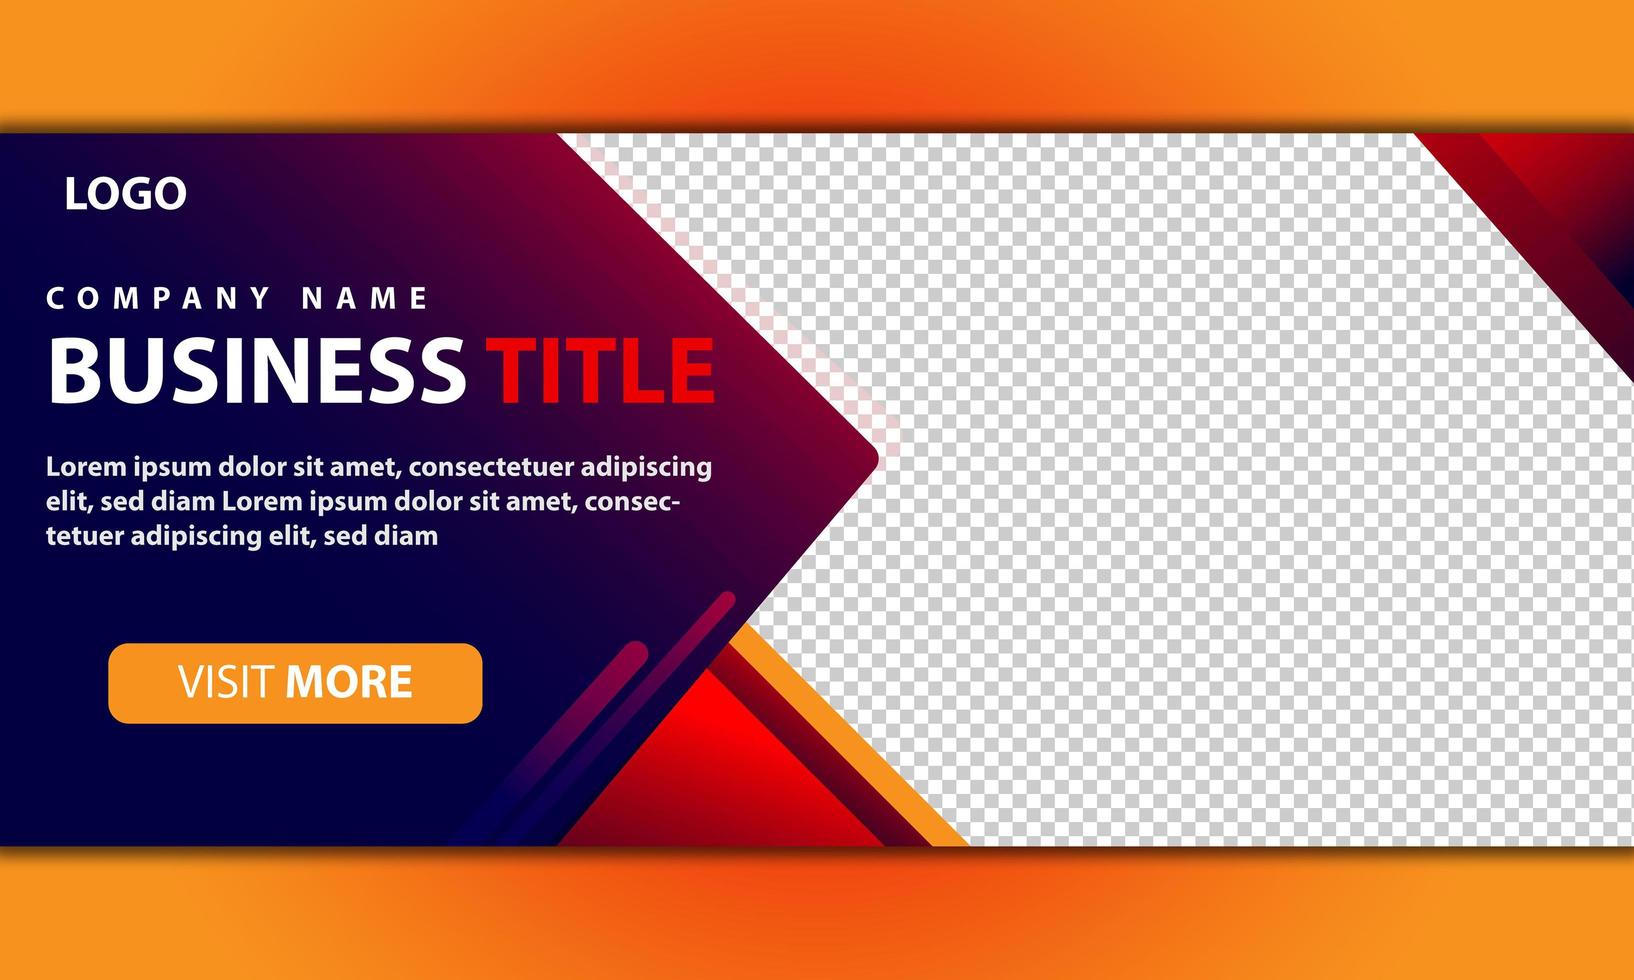 Gradient web banner template for corporate business vector